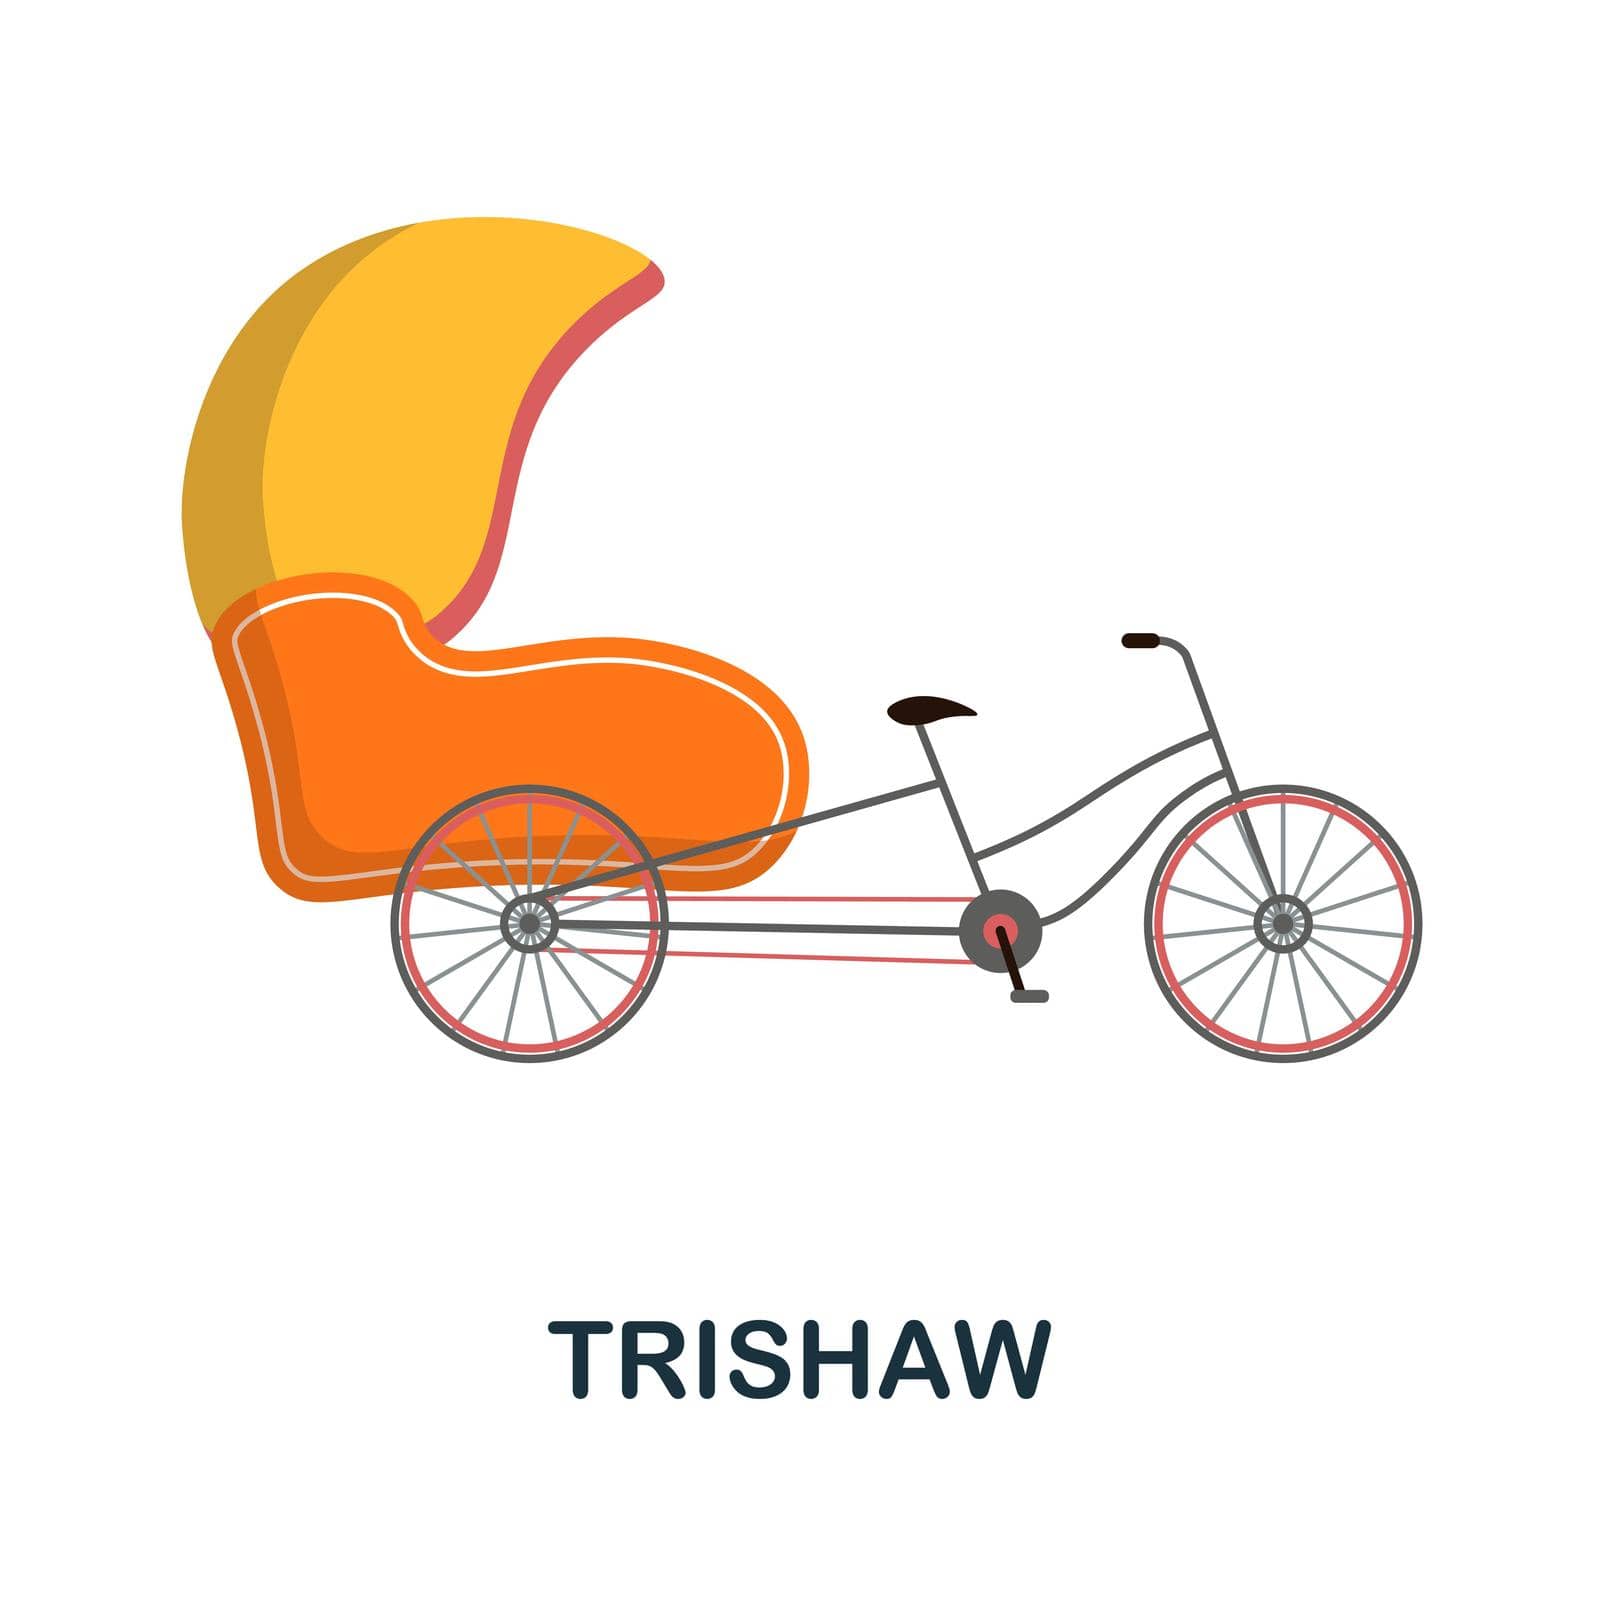 Trishaw flat icon. Colored element sign from public transport collection. Flat Trishaw icon sign for web design, infographics and more. by simakovavector